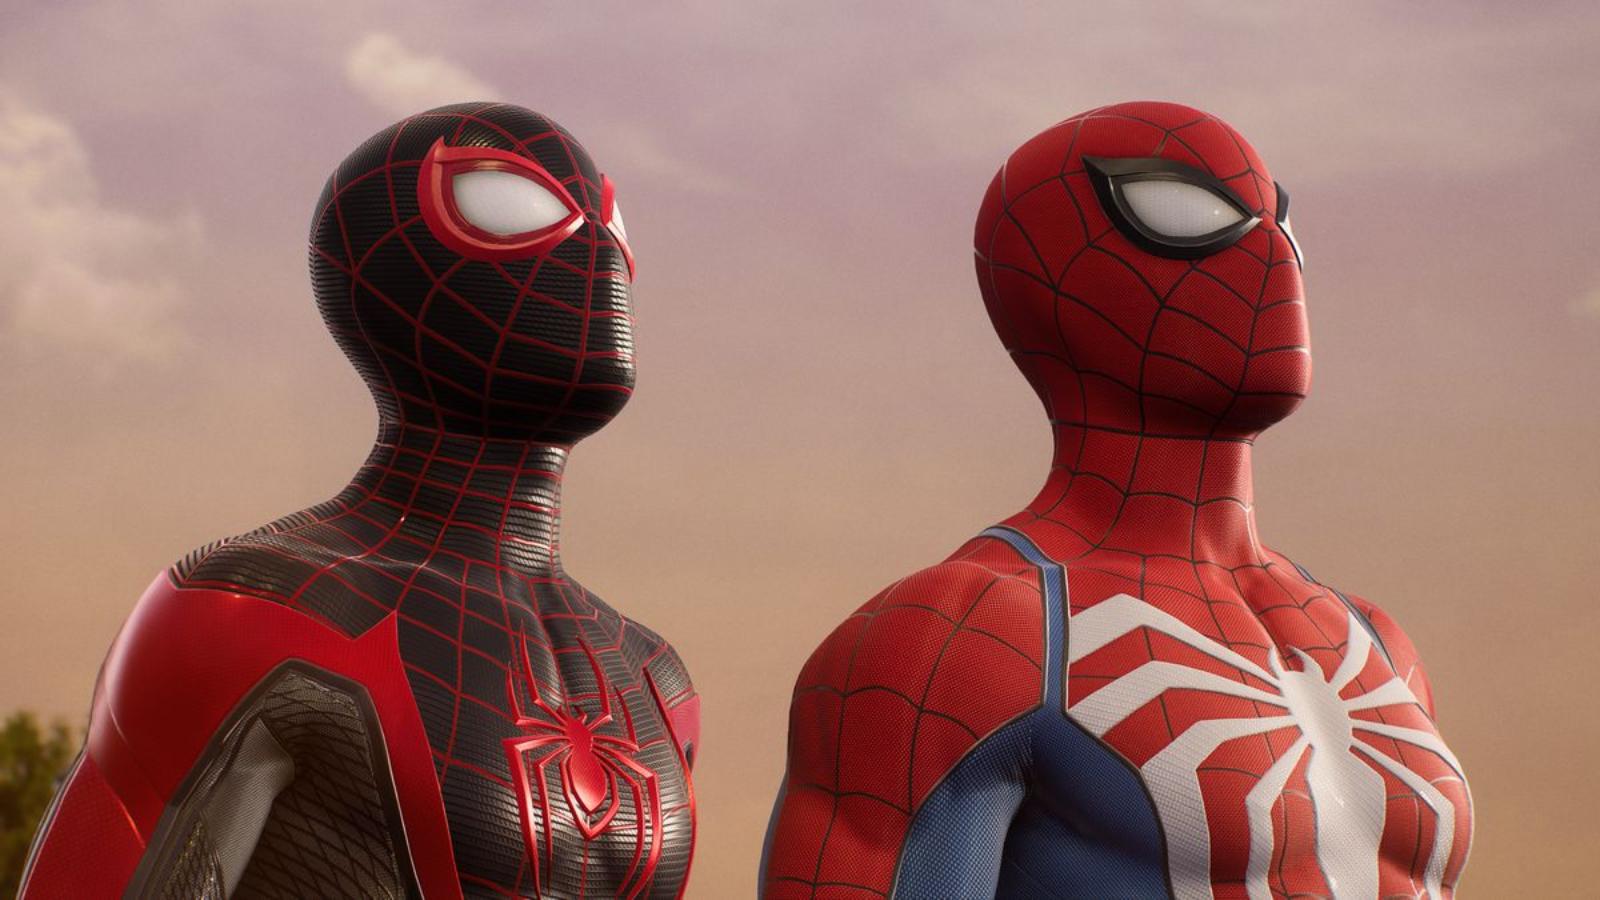 Fans Want to Know if They Can Upgrade from PS4 to Marvel's Spider